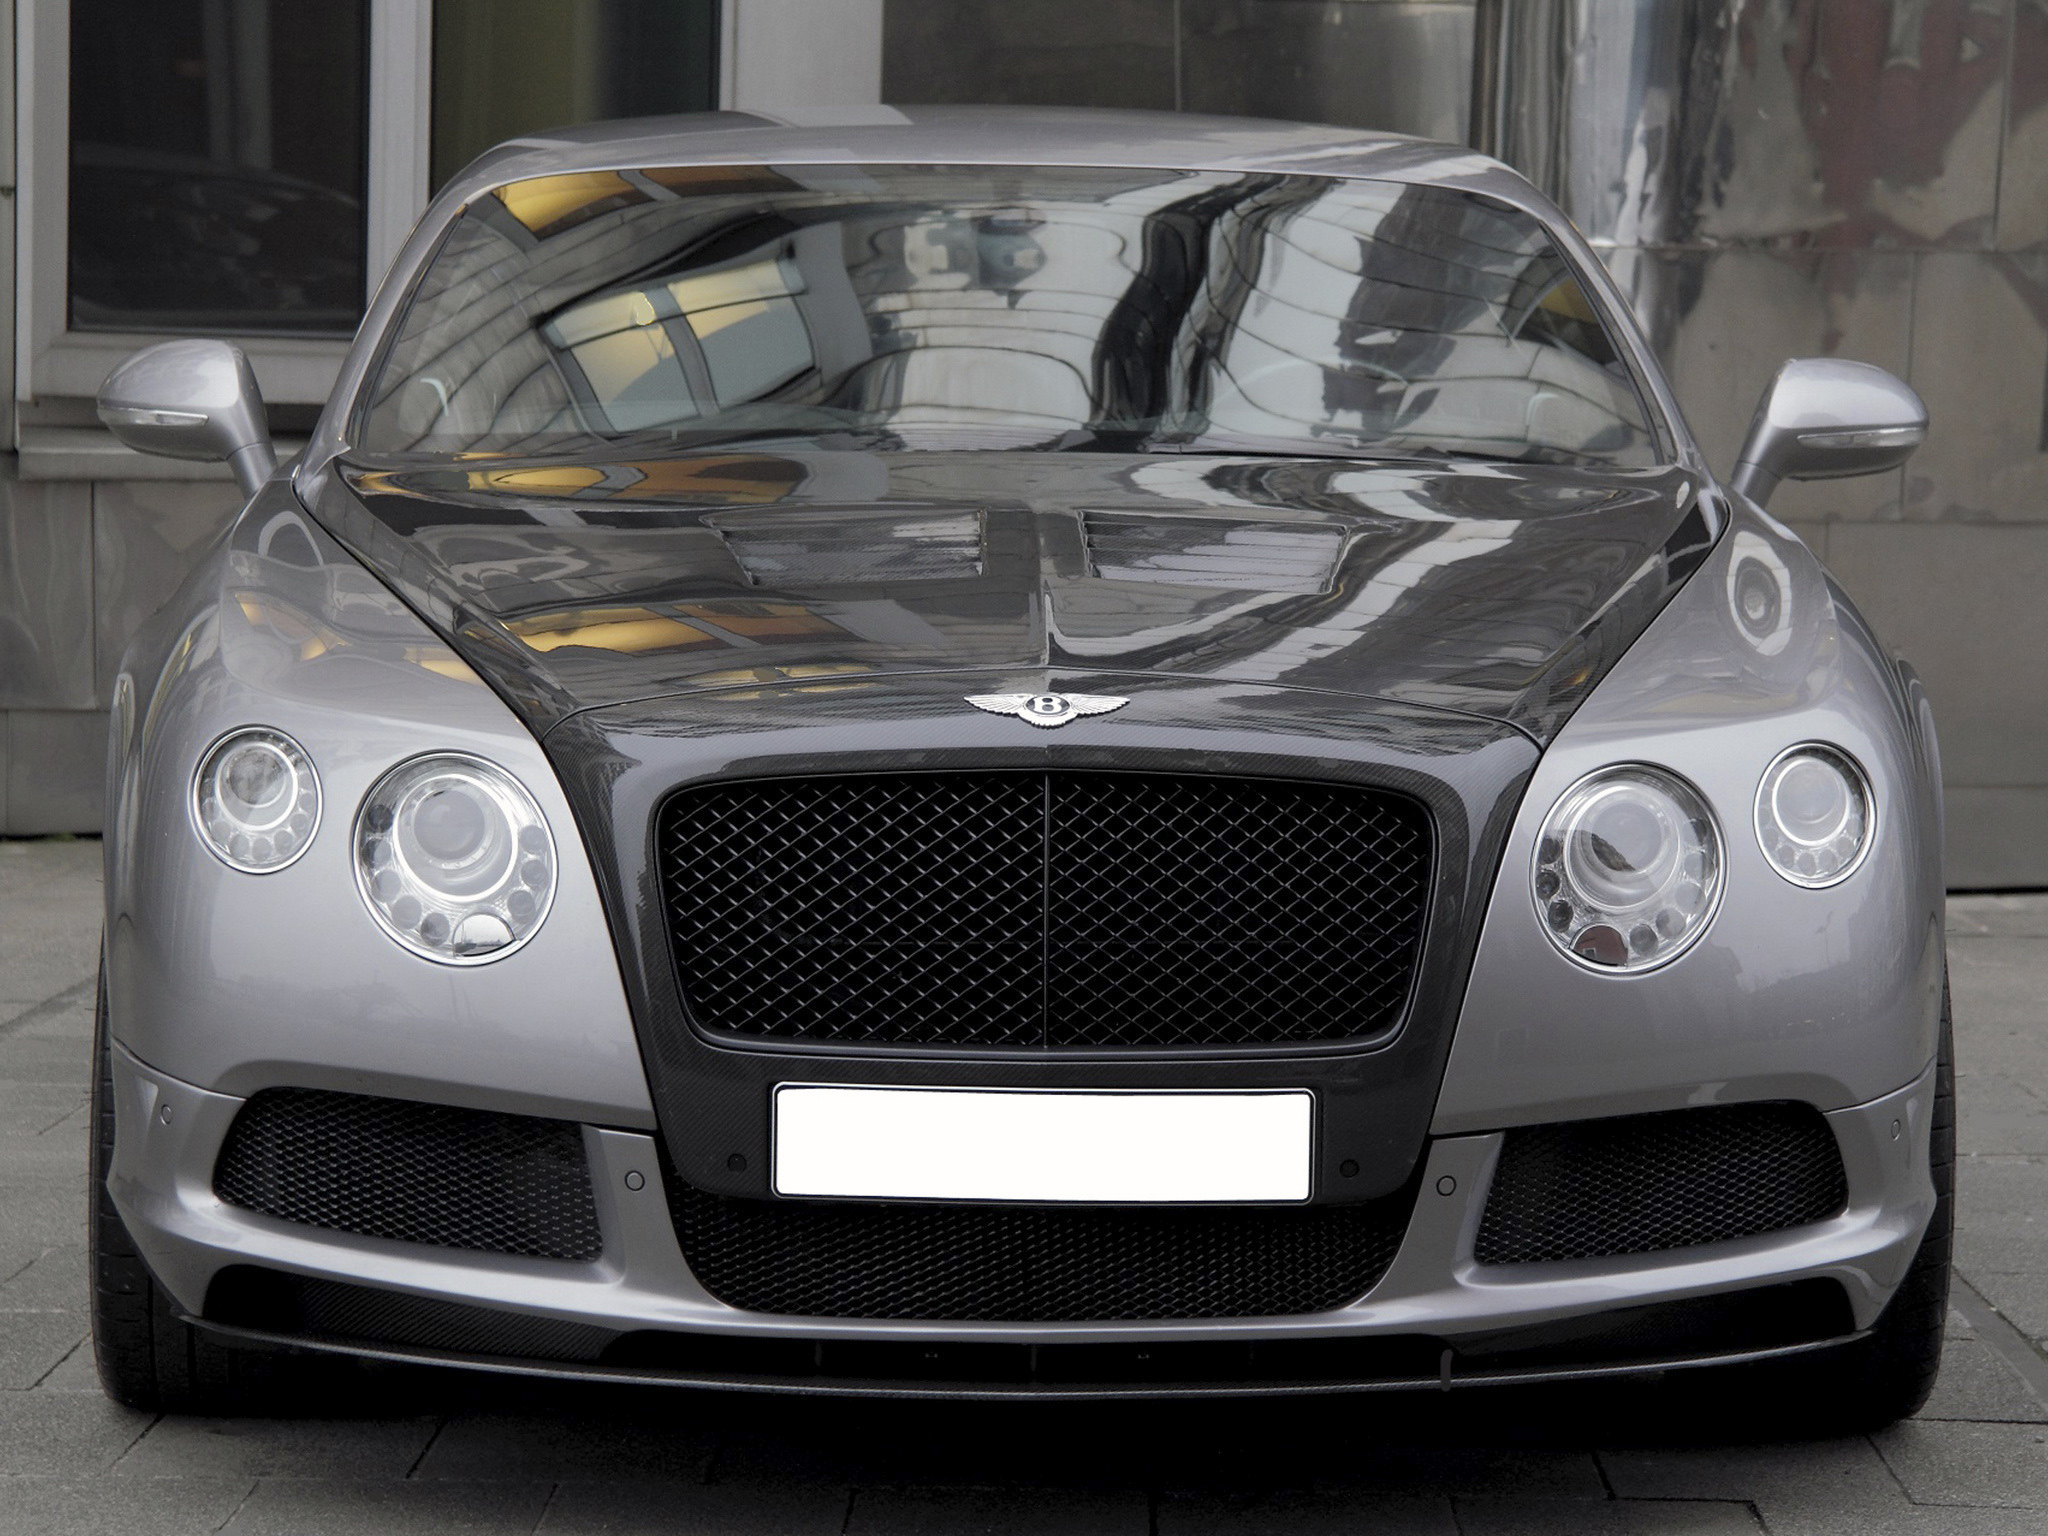 2013, Anderson, Germany, Bentley, Continental, Gt, Tuning, Luxury, G t Wallpaper